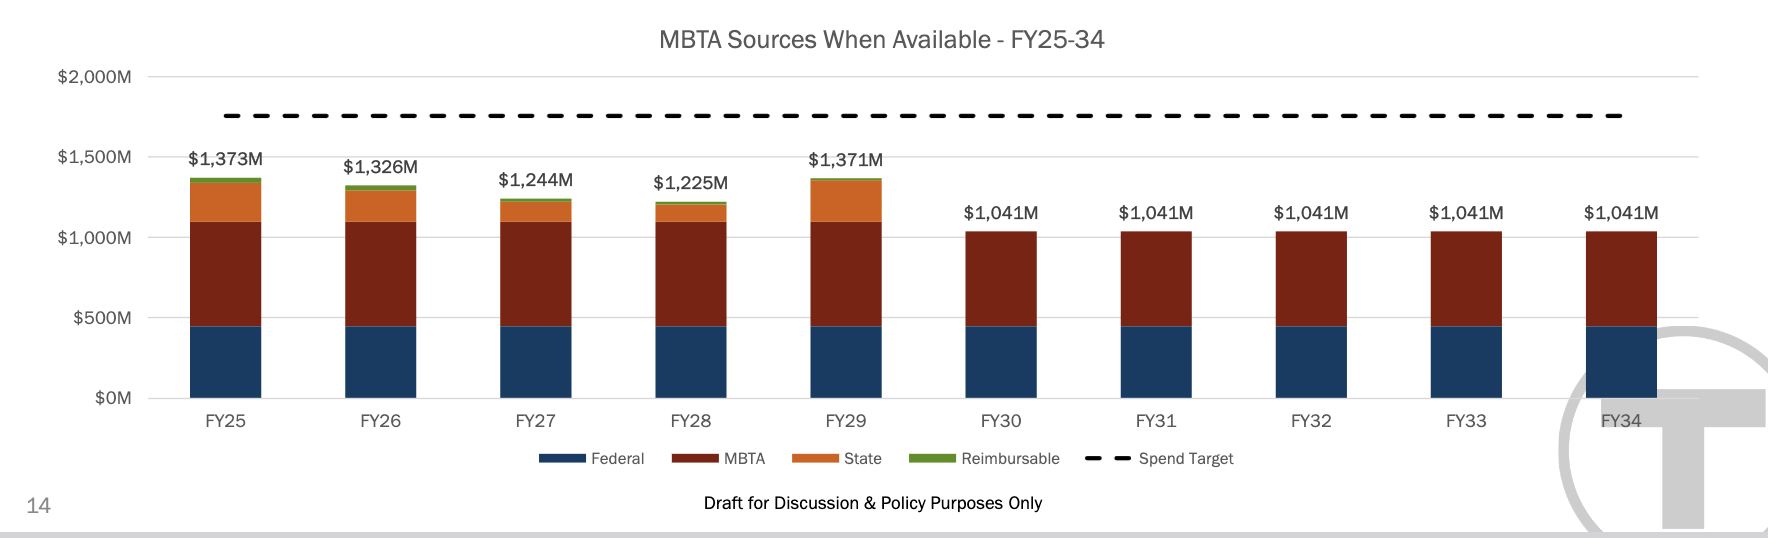 A bar chart shows the MBTA's future capital funding for each fiscal year, starting with FY25 at left and ending at FY24 at right. The columns steadily get shorter year by year, shrinking from 1,373 million in 2025 to 1,041 million in FY2030 and beyond. A dotted line hovering above the columns shows the T's "spend target" to maintain a state of good repair. 